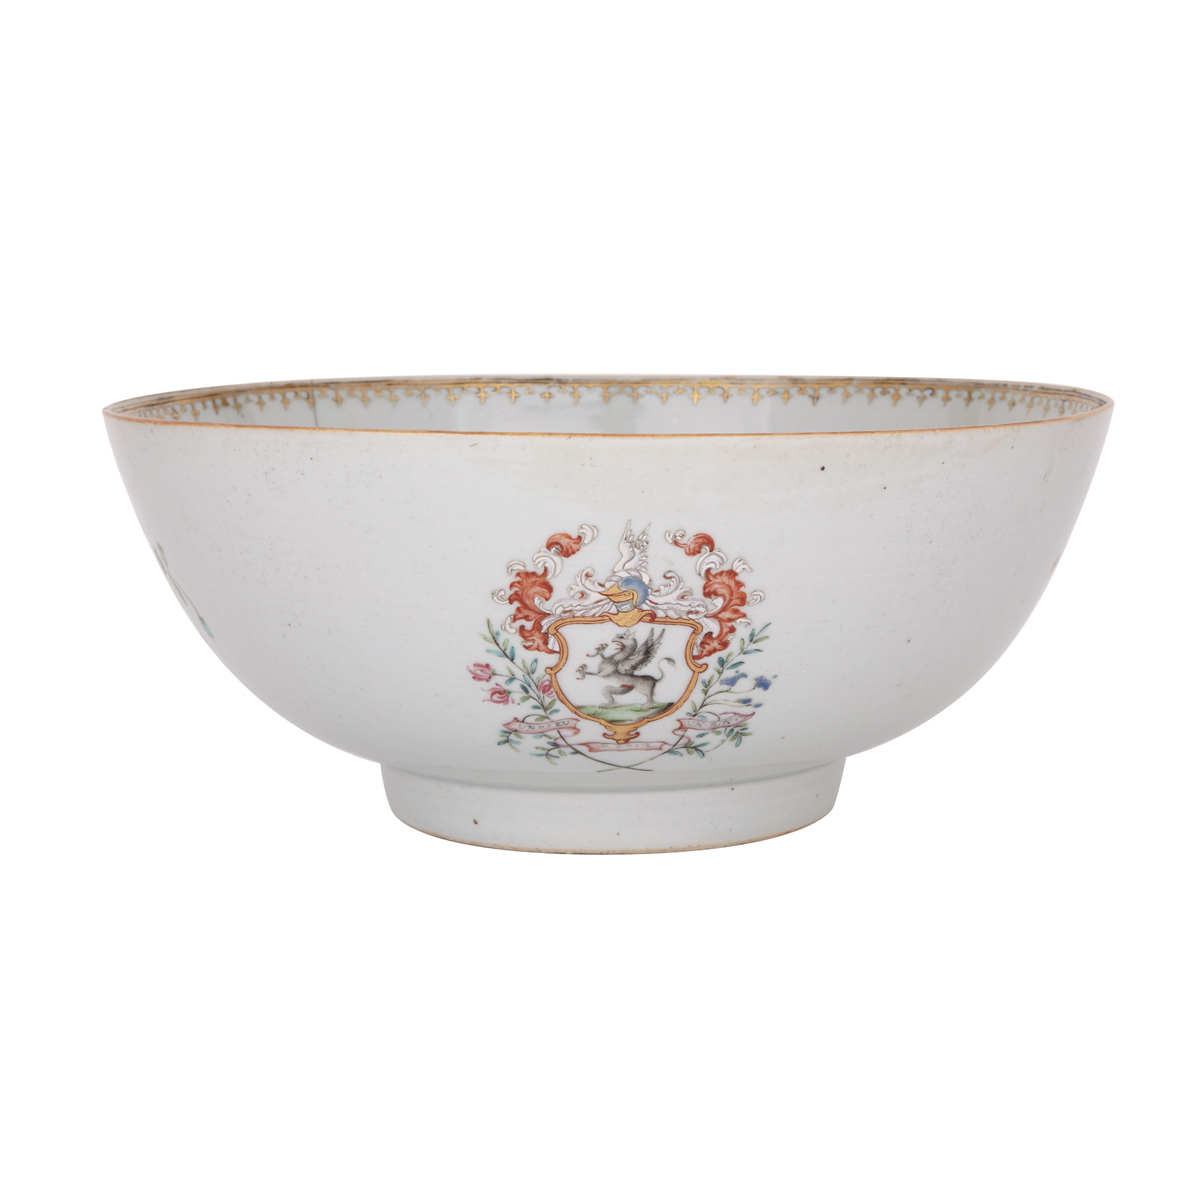 Large Export Armorial Bowl, 18th Century